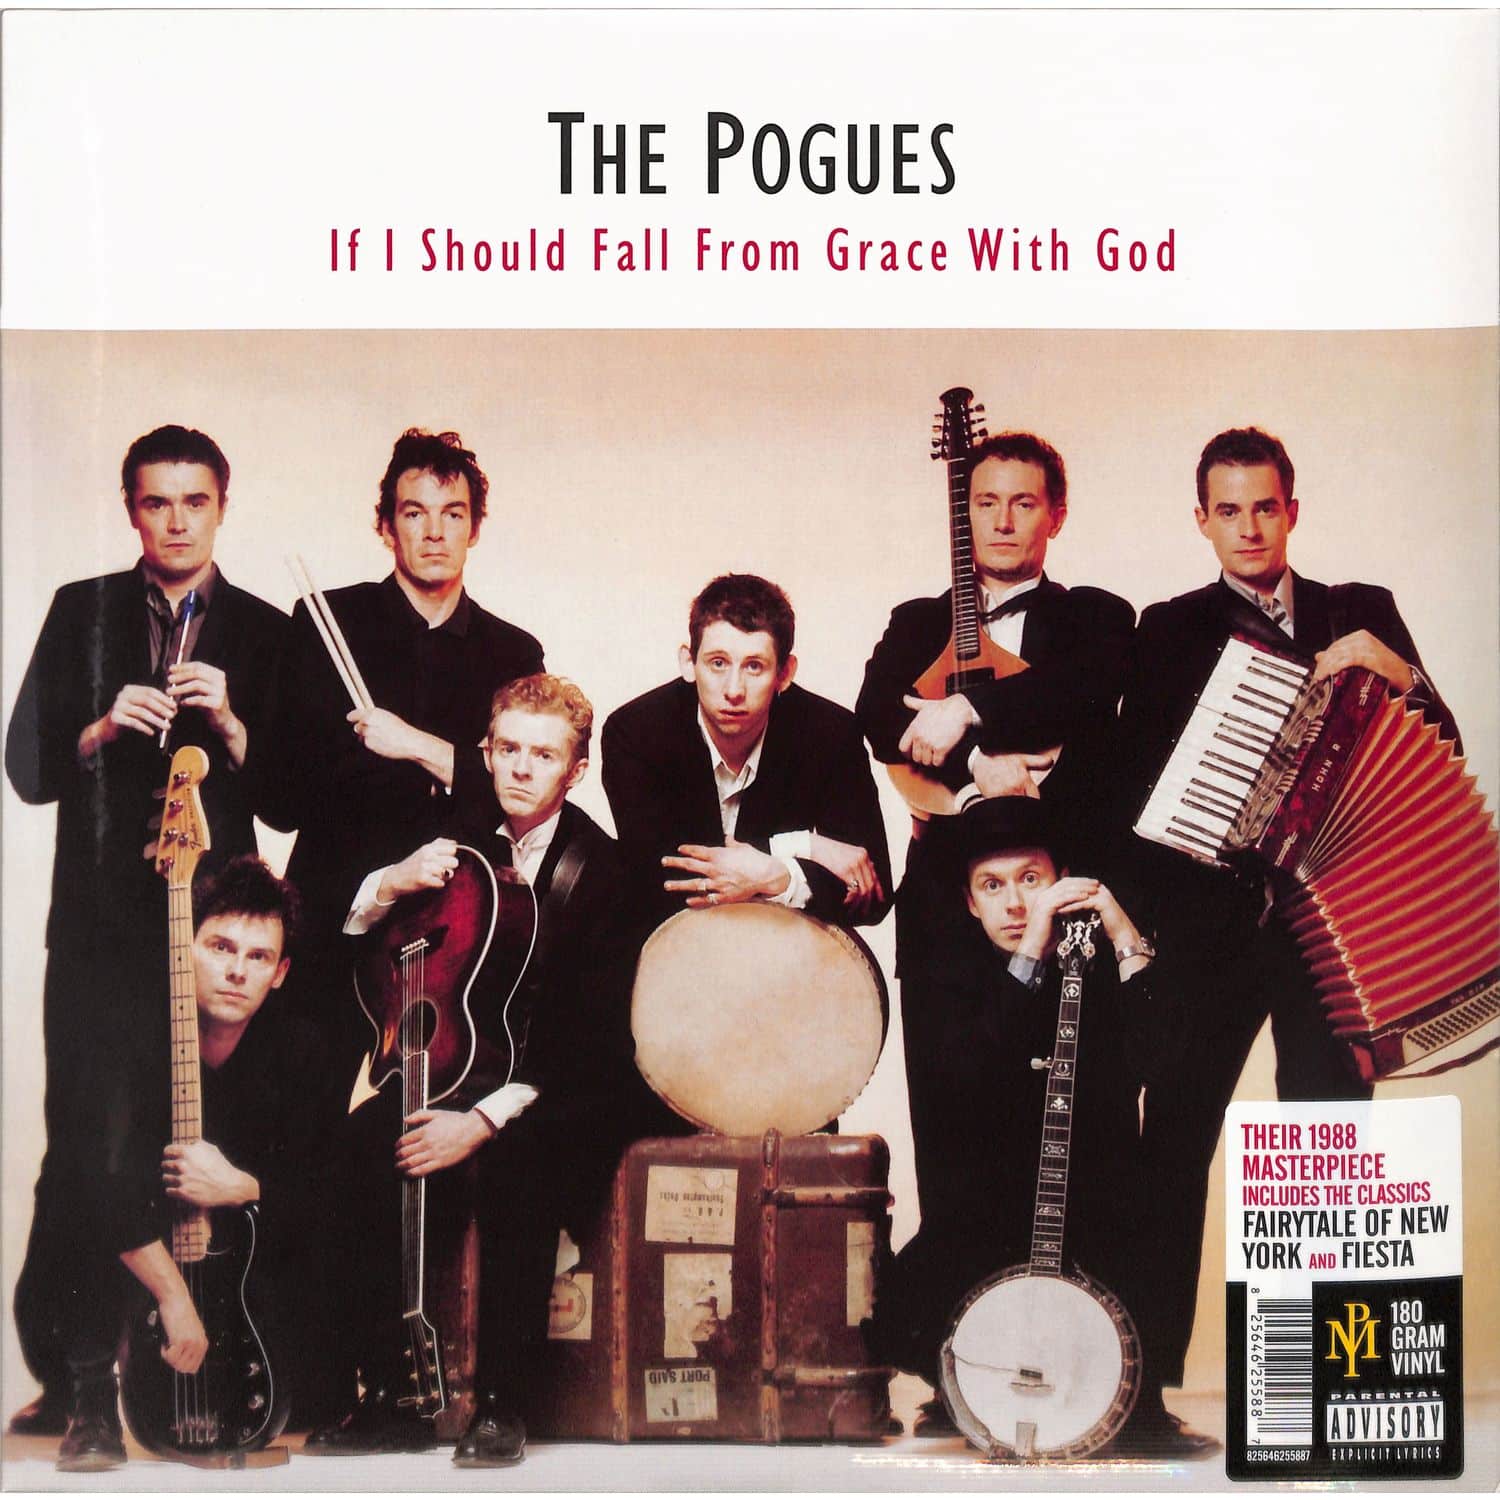 The Pogues - IF I SHOULD FALL FROM GRACE WITH GOD 